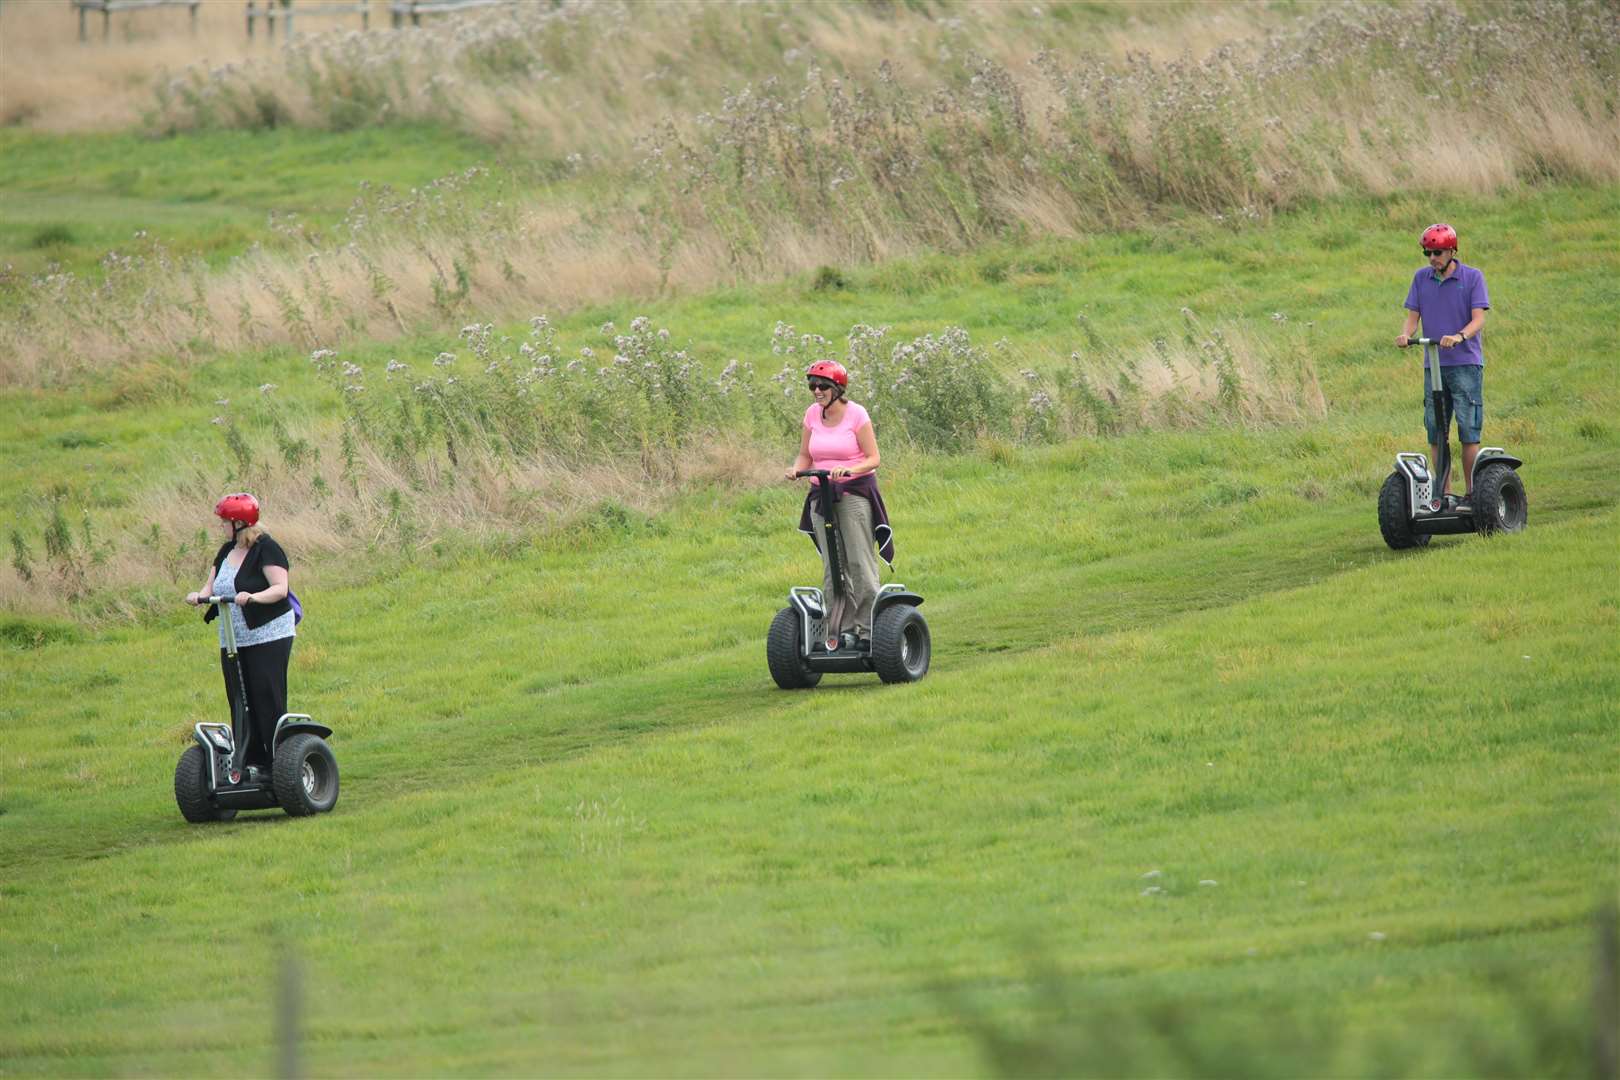 Segway riding is a growing increasingly popular